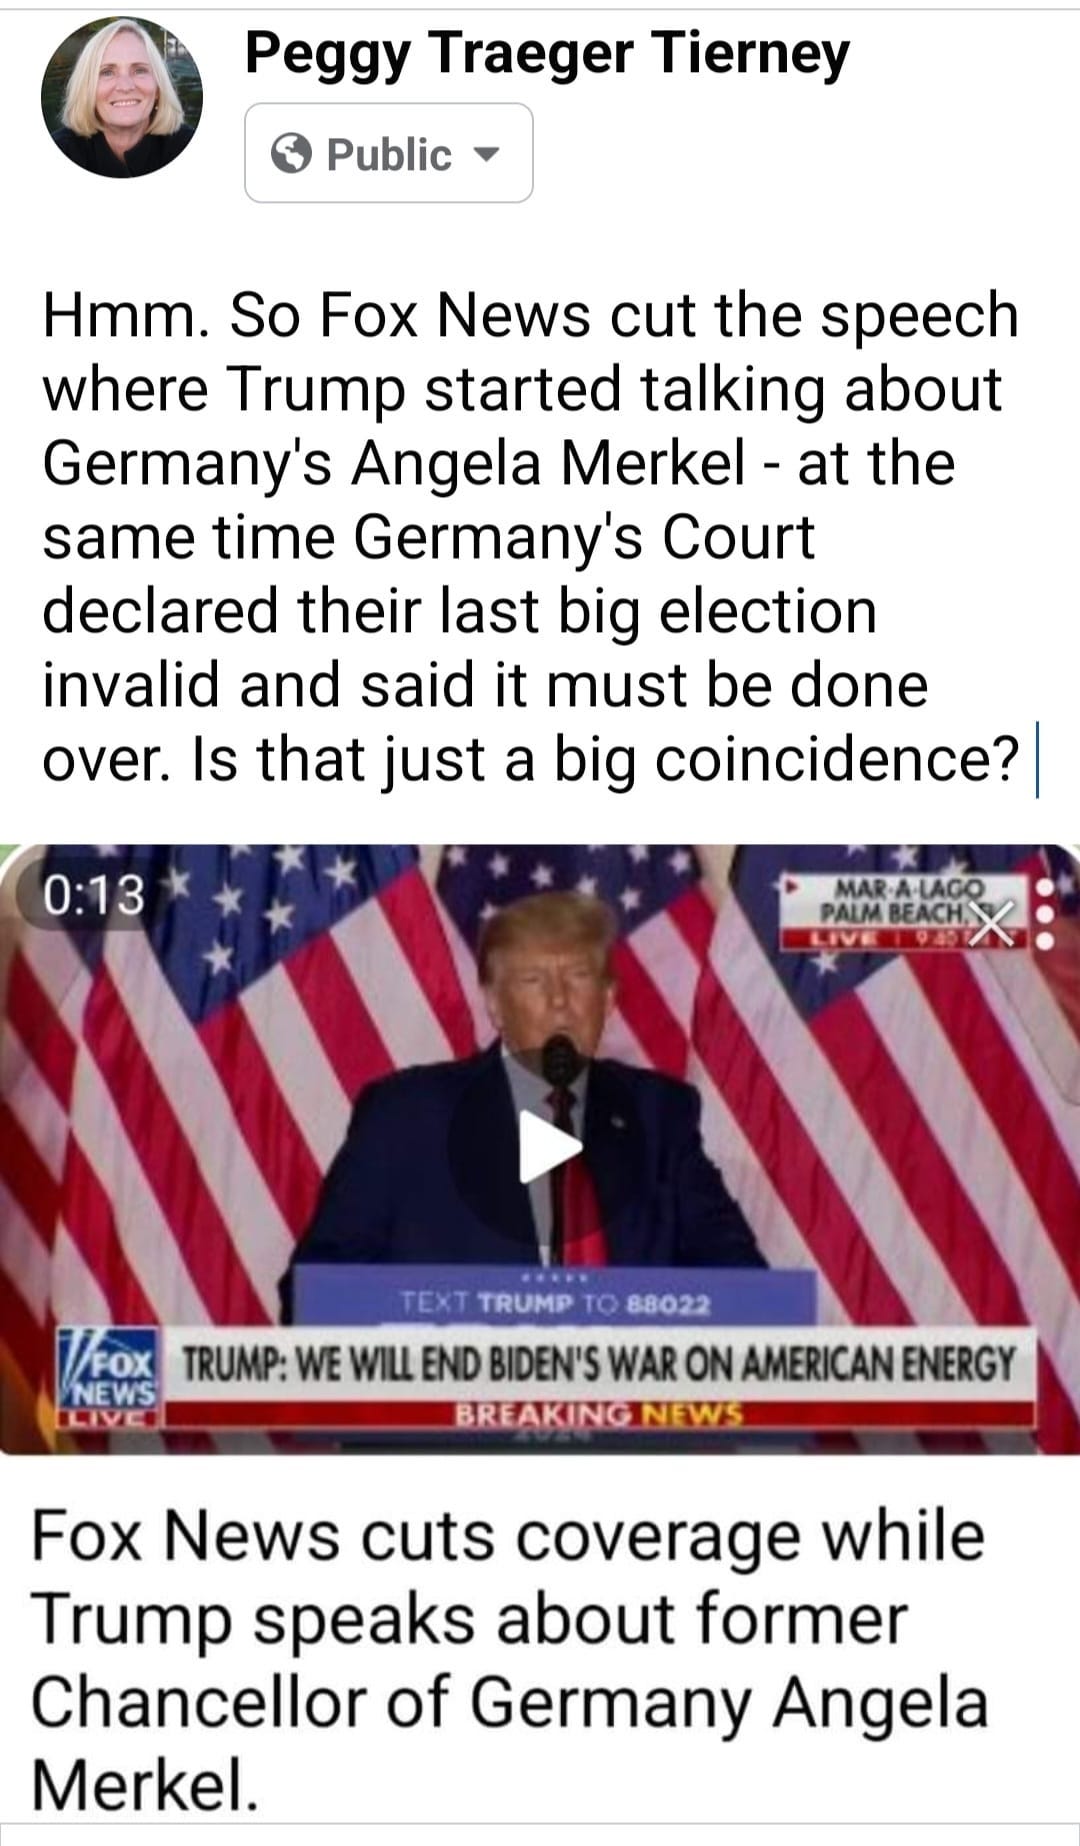 May be an image of 2 people and text that says 'Peggy Traeger Tierney Public Hmm. So Fox News cut the speech where Trump started talking about Germany's Angela Merkel at the same time Germany's Court declared their last big election invalid and said it must be done over. Is that just a big coincidence? 0:13 MARA-LA PALM BEACH LIVE TRUMP и 88022 /FoX NEWS TRUMP: WE WILL END BIDEN'S WAR ON AMERICAN ENERGY BREAKING NEWS Fox News cuts coverage while Trump speaks about former Chancellor of Germany Angela Merkel.'